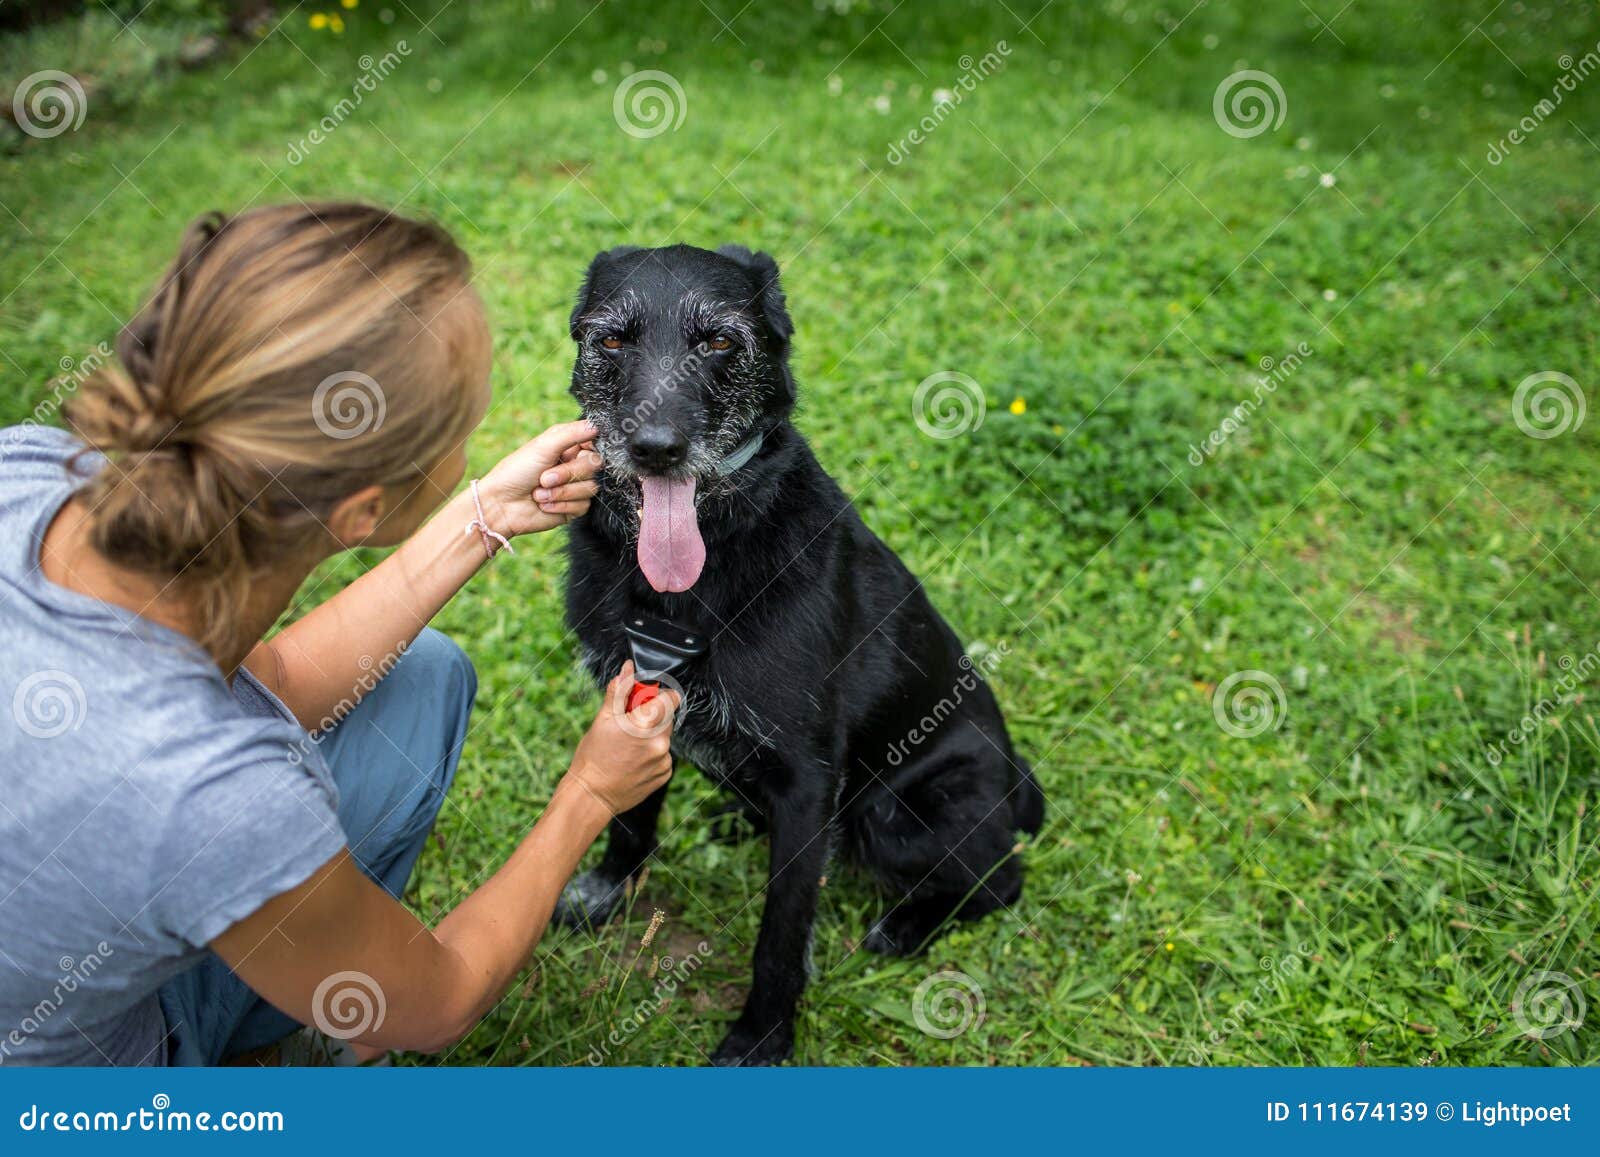 Young Woman Combing Out the Furof Hew Dog Stock Image - Image of ...